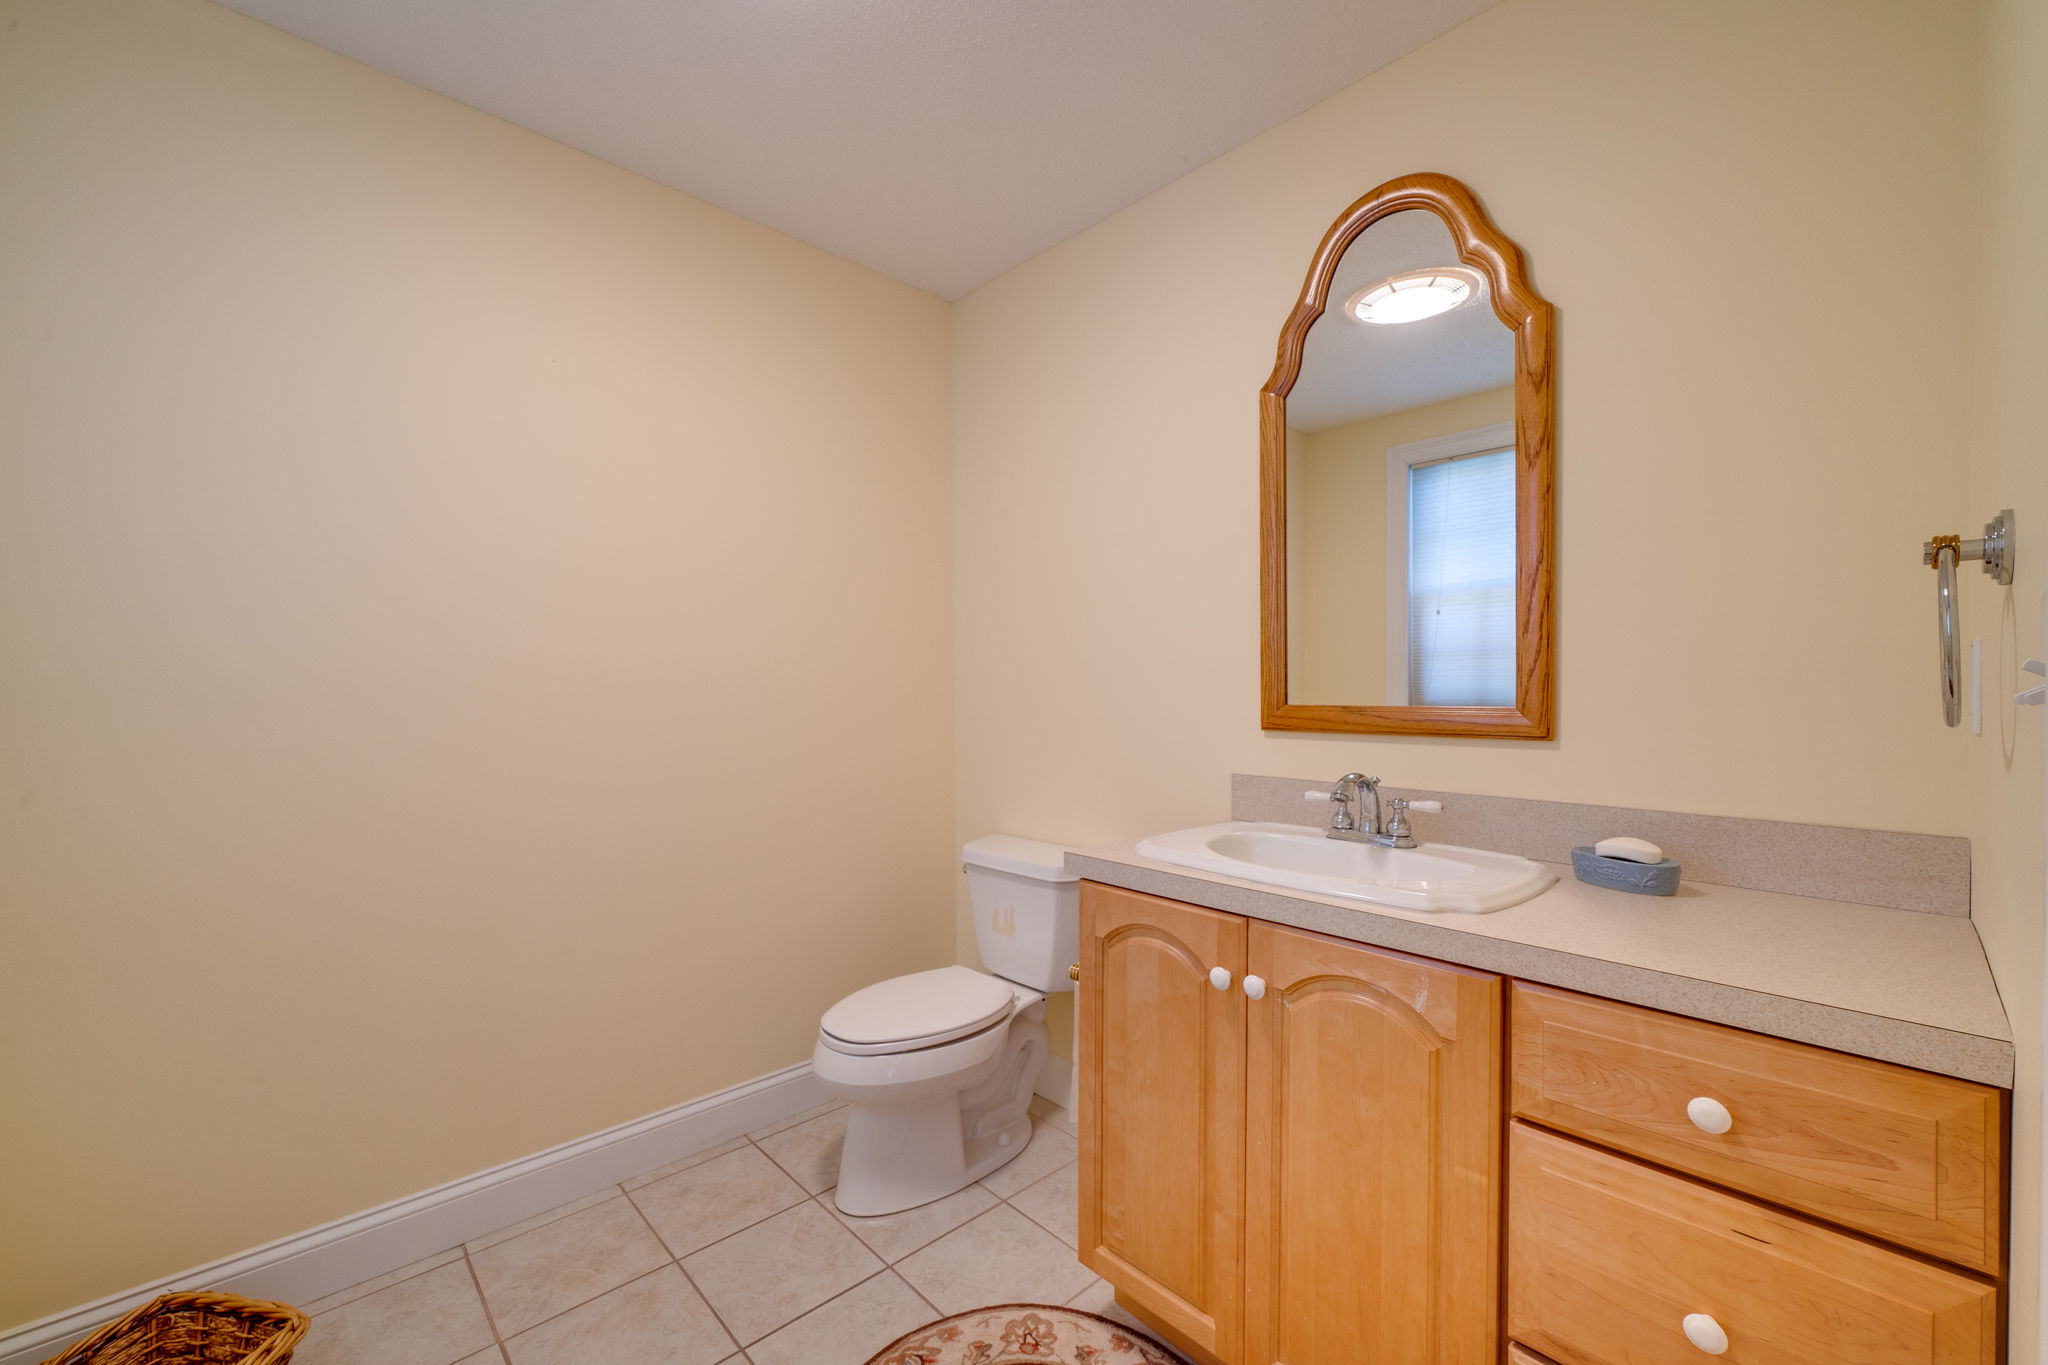 Half Bath in Lower Level can easily be fitted with a tub or shower